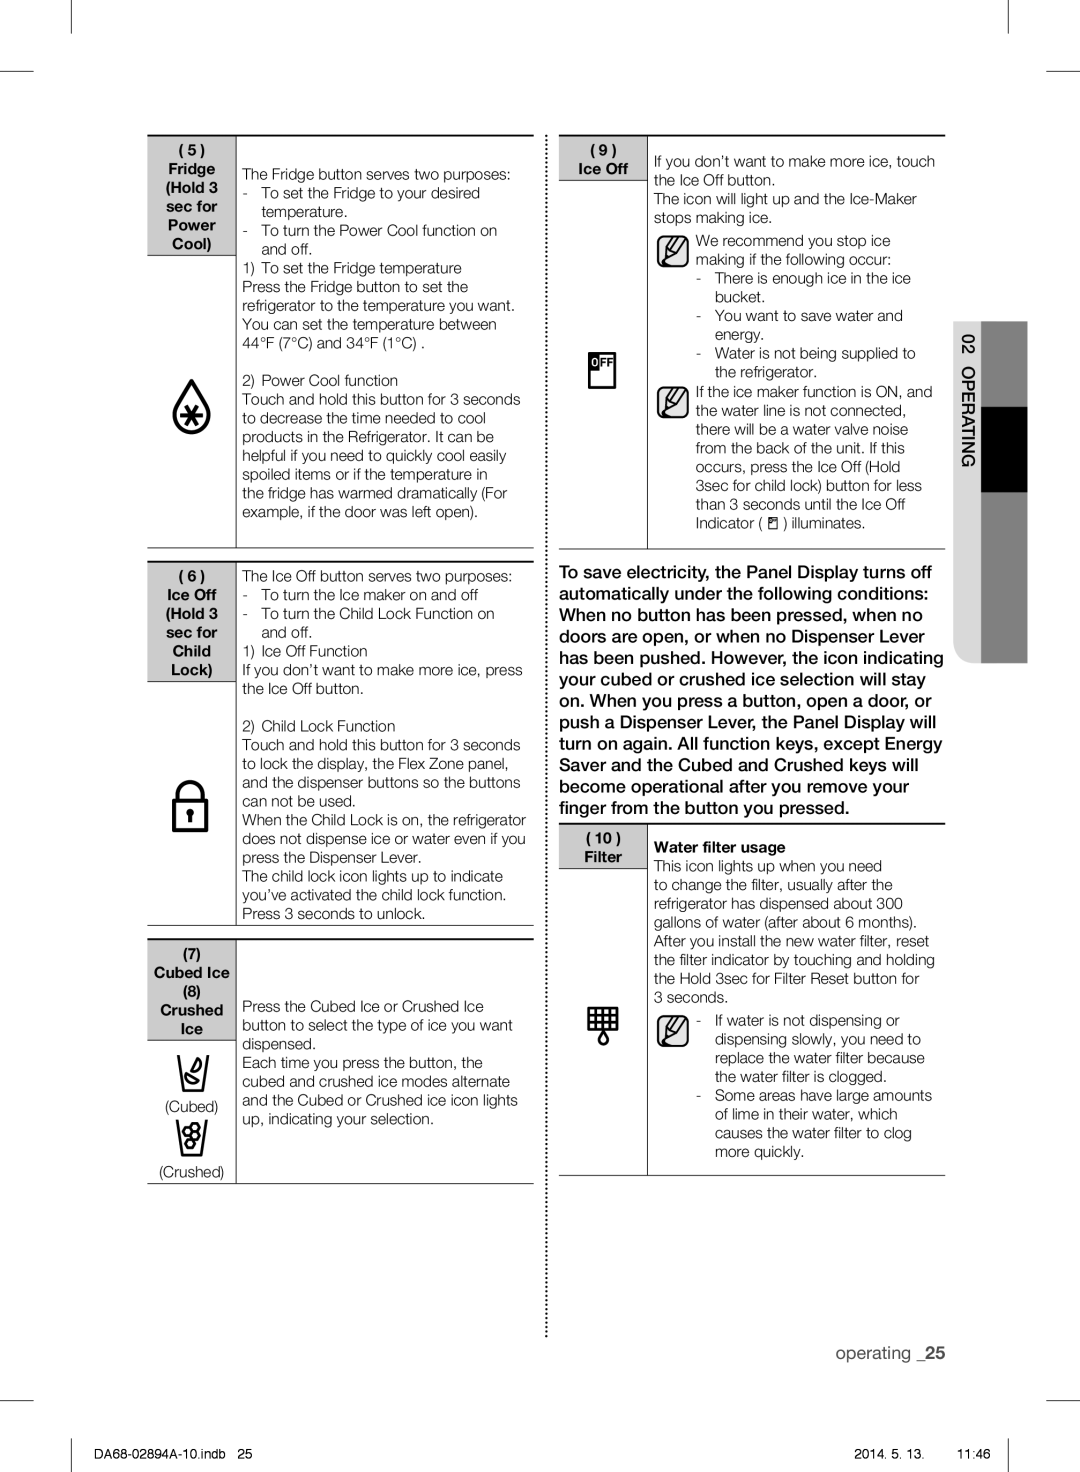 Samsung RF31FMESBSR user manual operating _25, sec for, Power, Ice Off, Lock, Water filter usage, Filter 